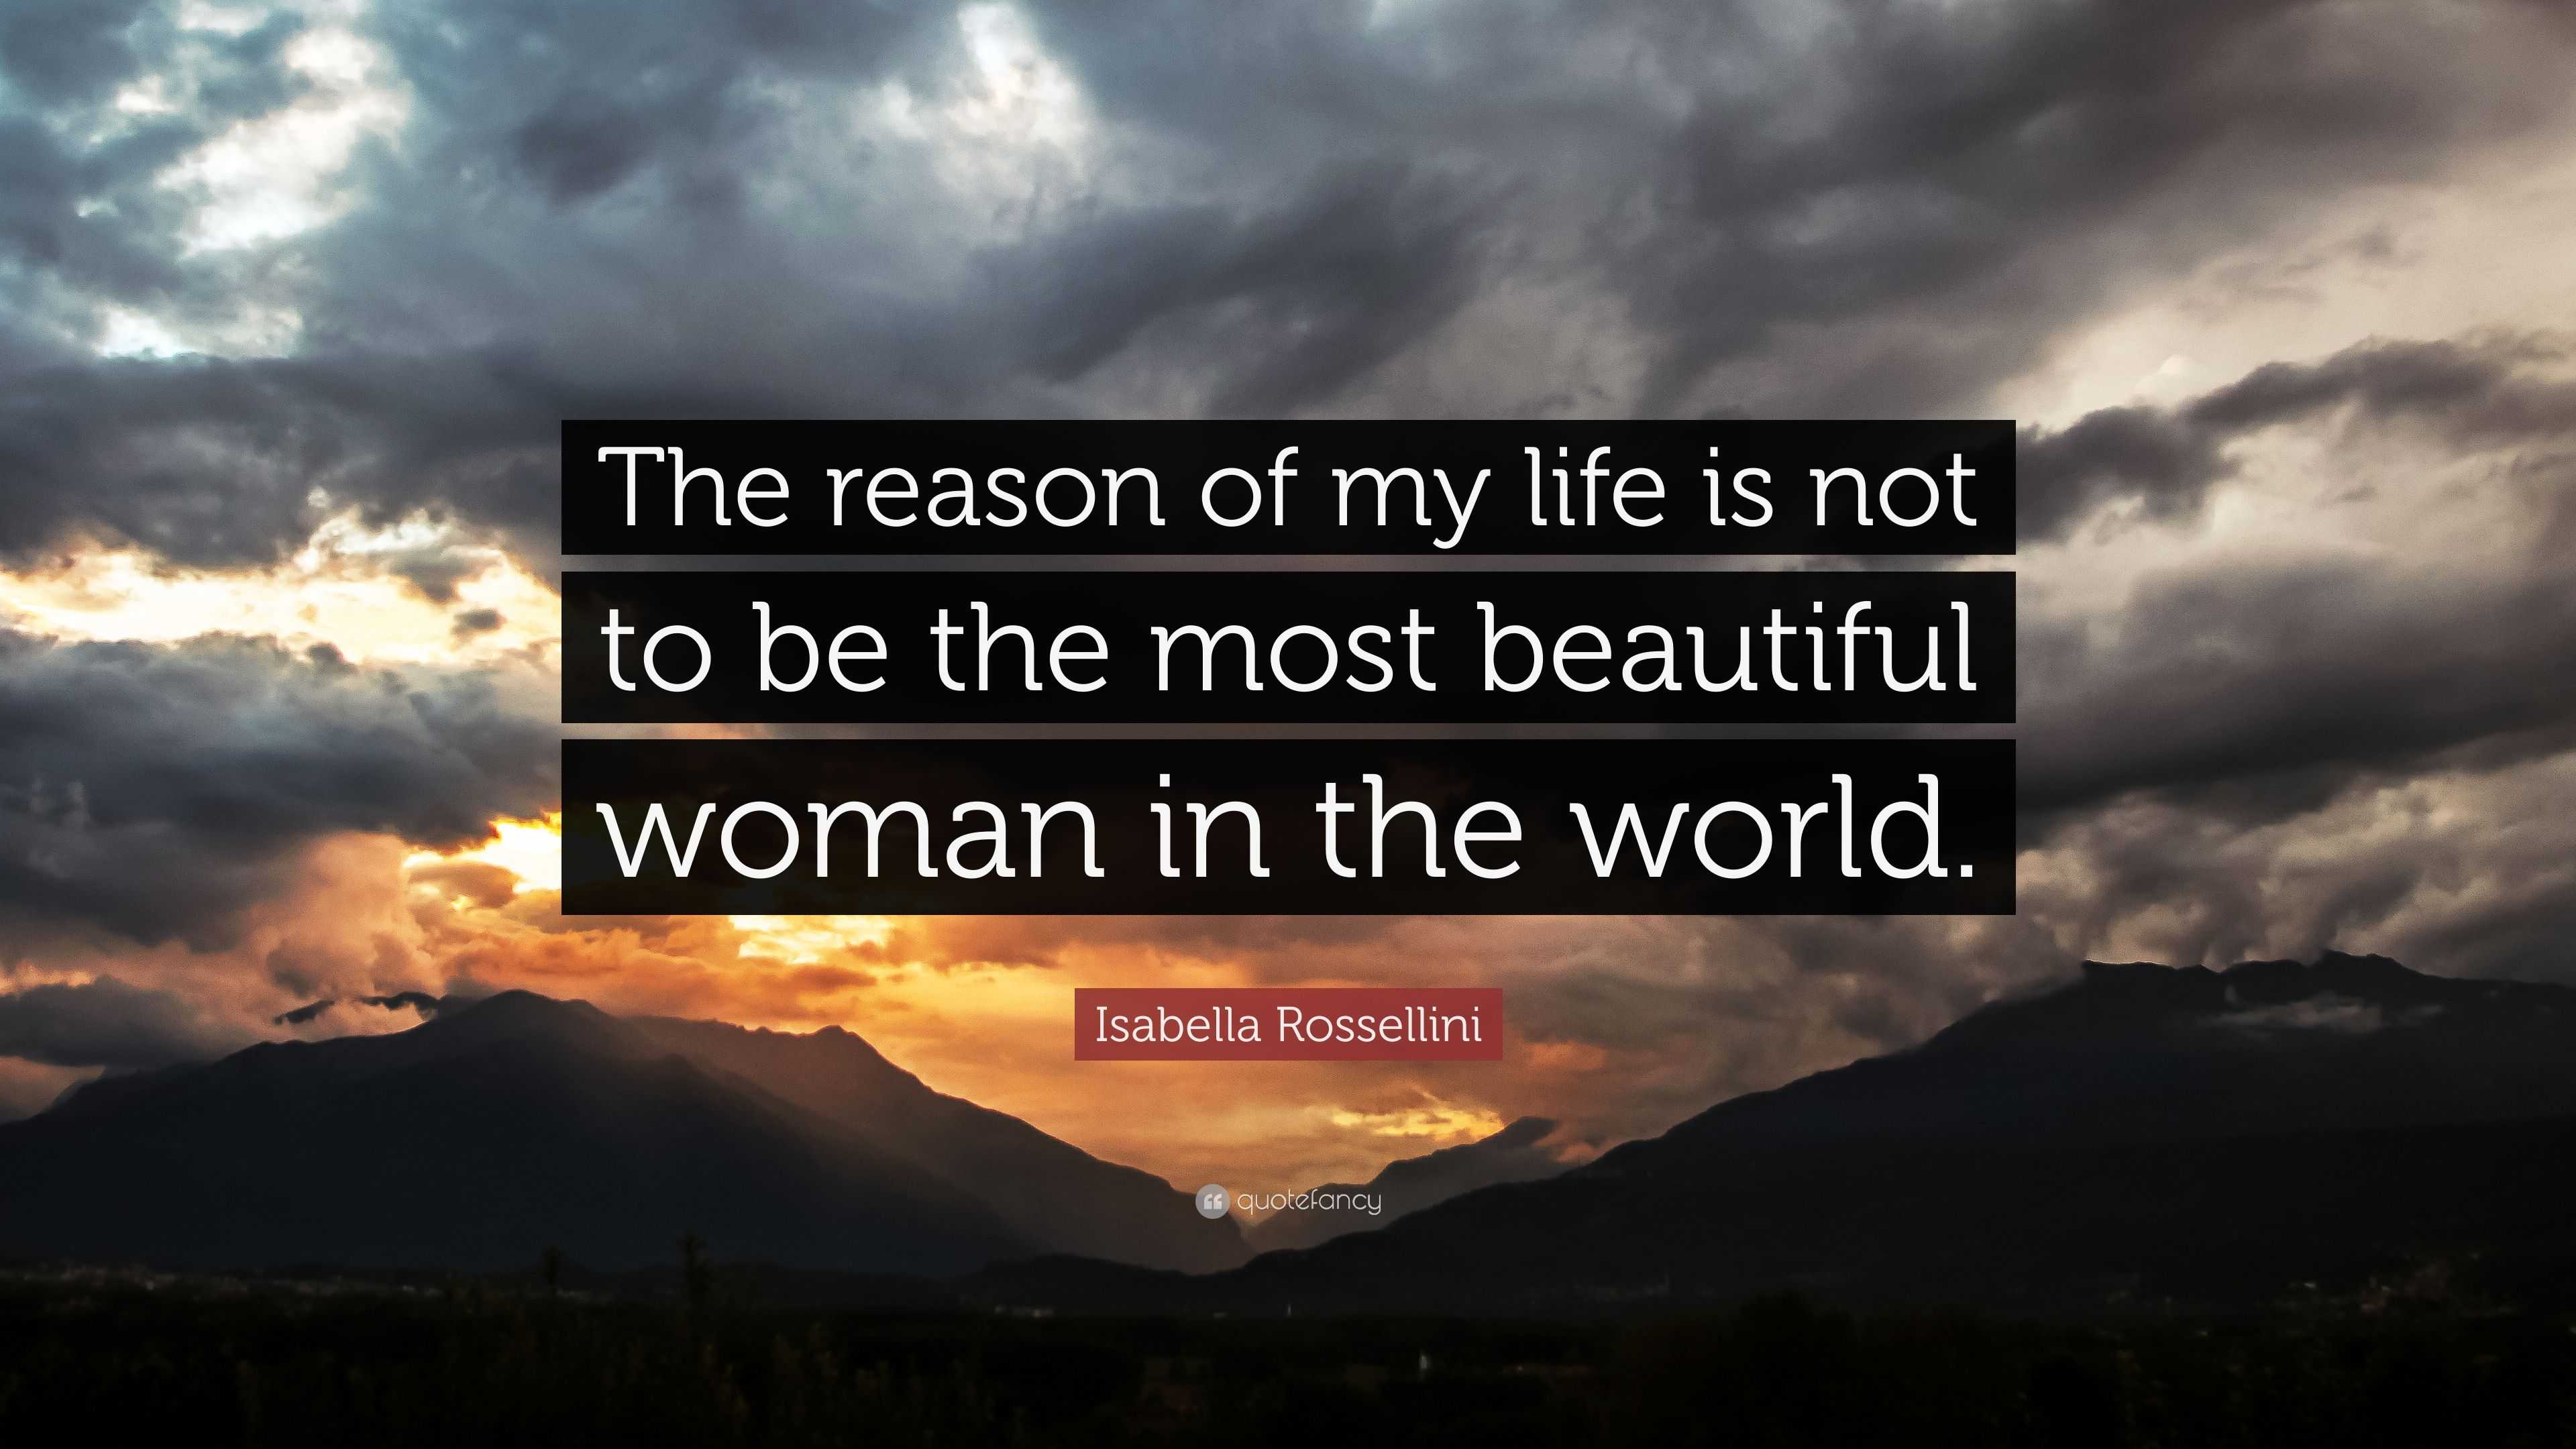 Isabella Rossellini Quote: “The reason of my life is not to be the most ...